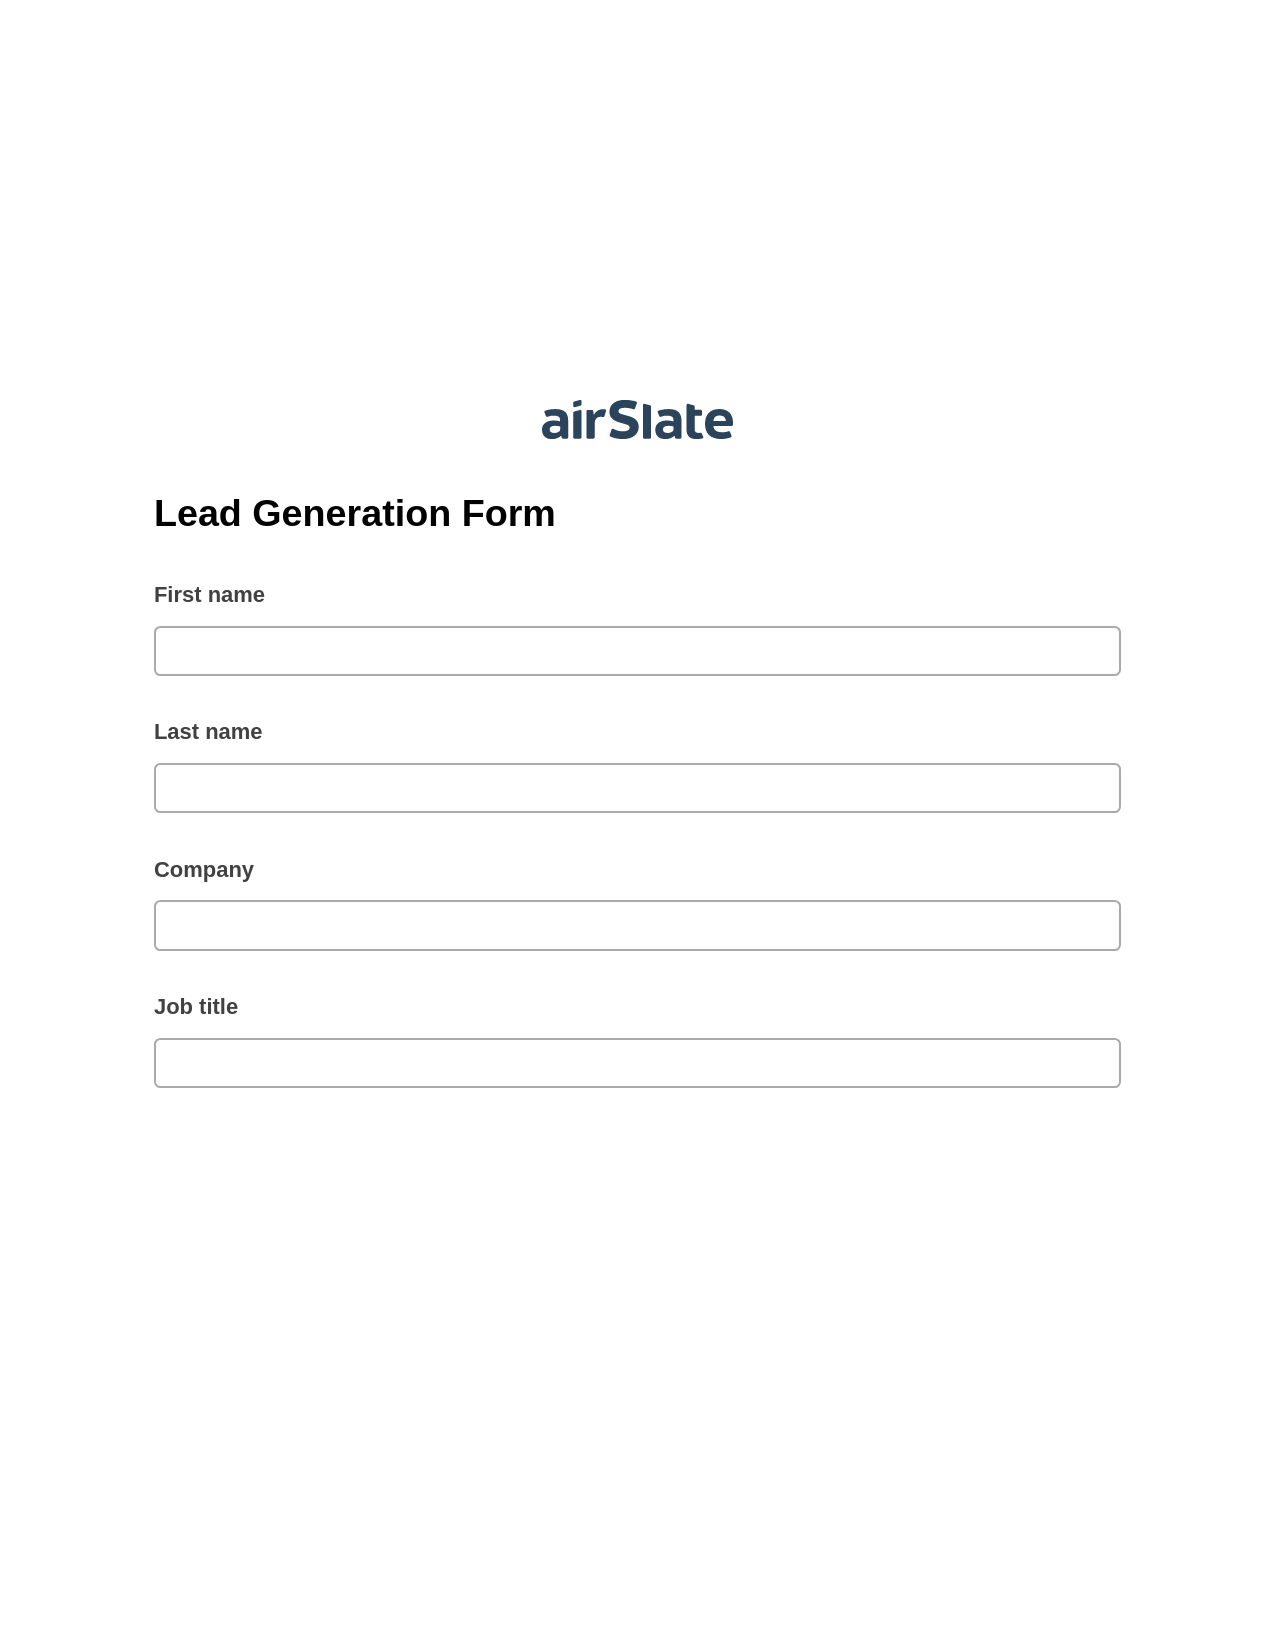 Lead Generation Form Pre-fill from MySQL Bot, Remove Tags From Slate Bot, Archive to Dropbox Bot